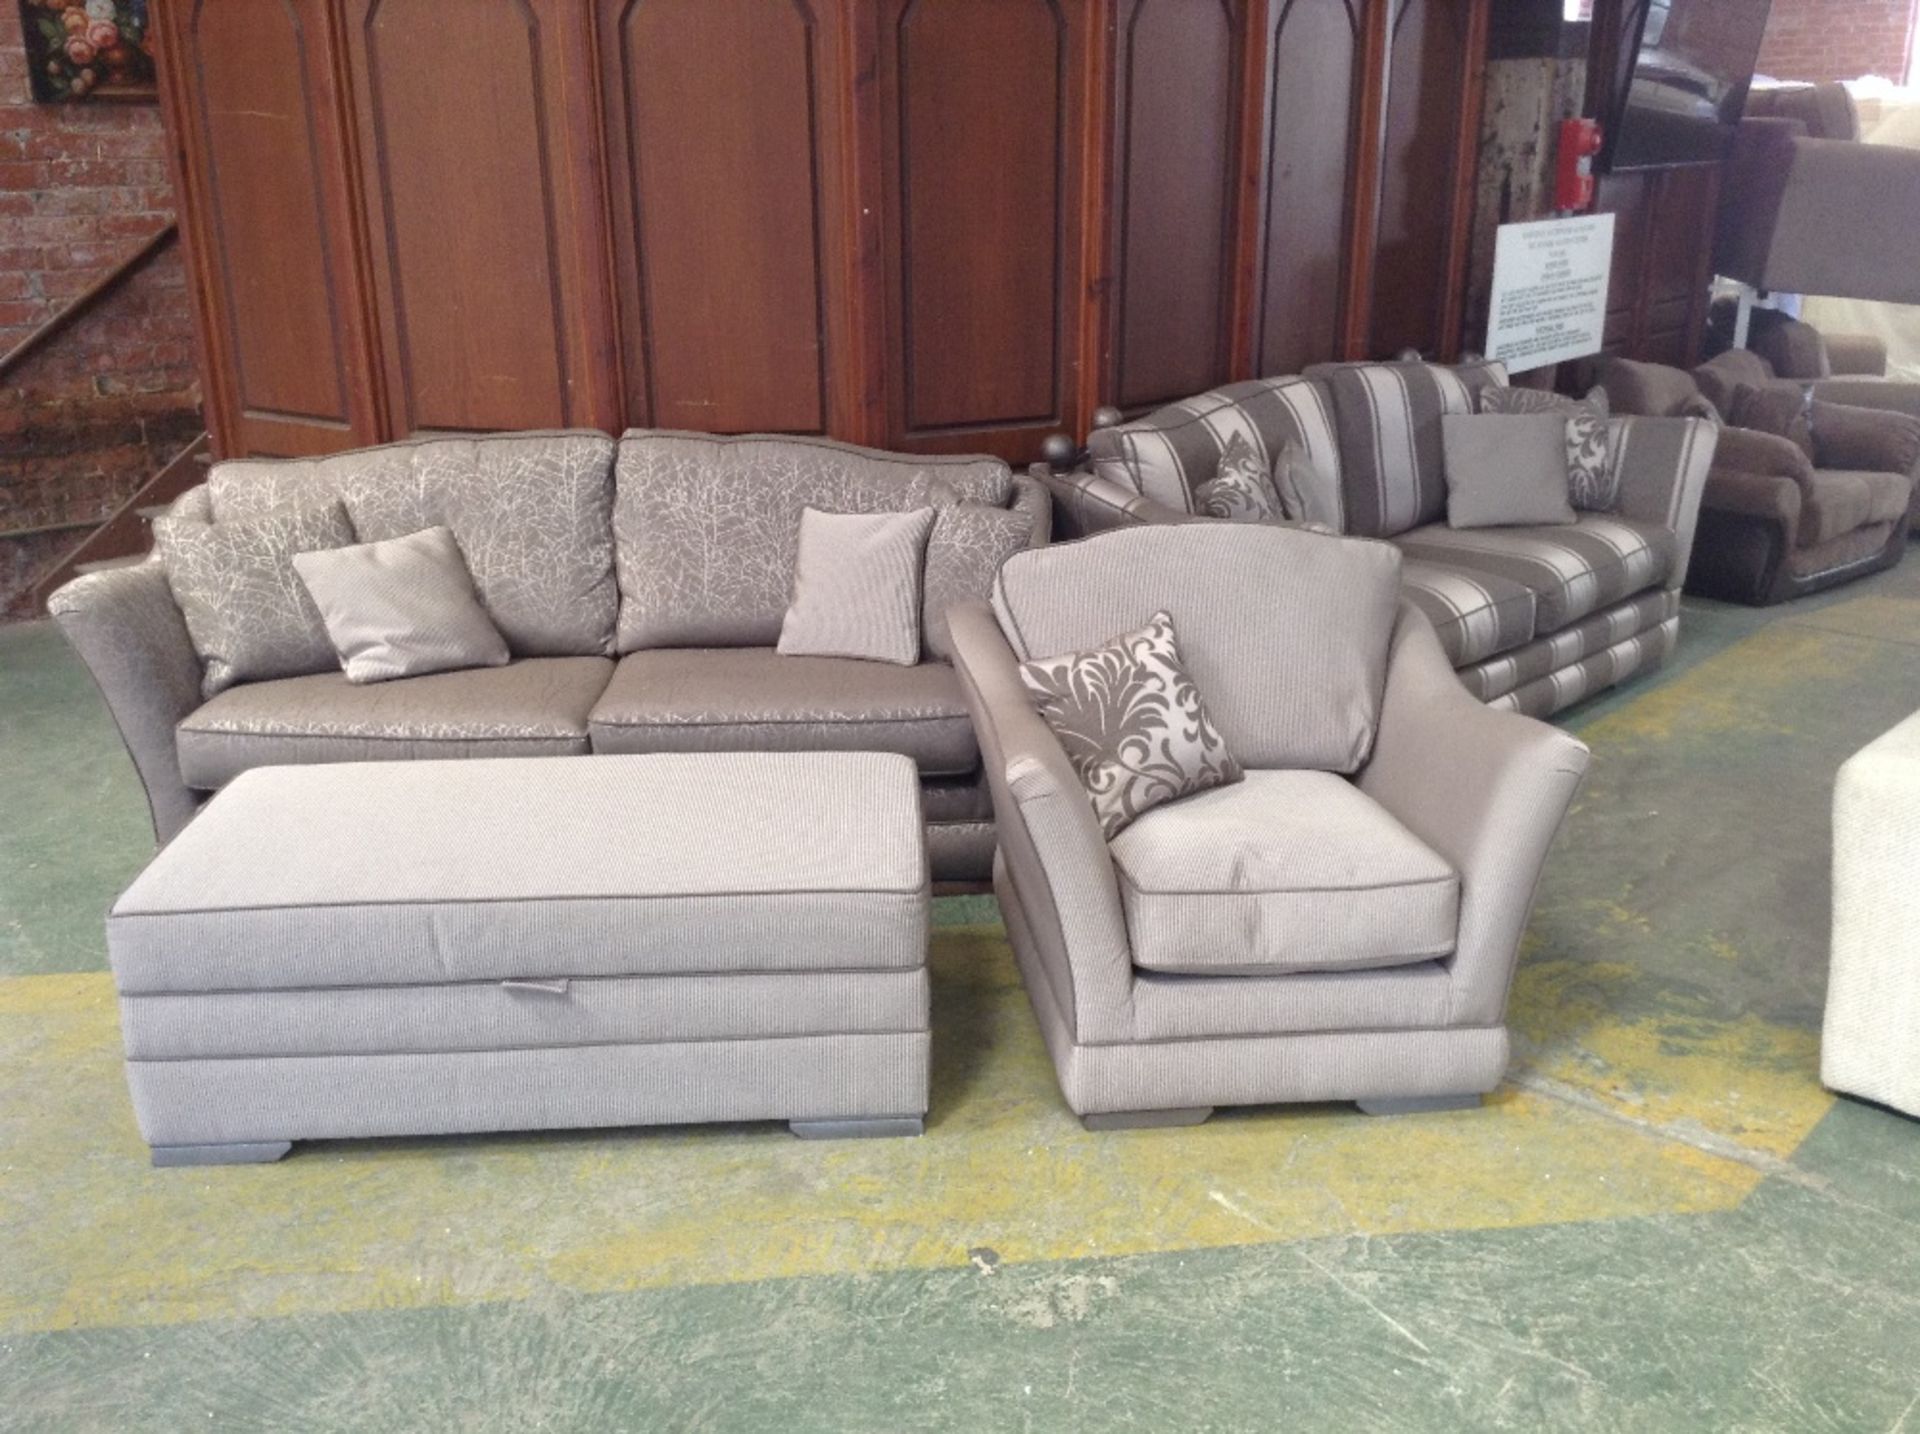 NOLE END STRIPED 3 SEATER SOFA, PATTERNED 3 SEATER SOFA,